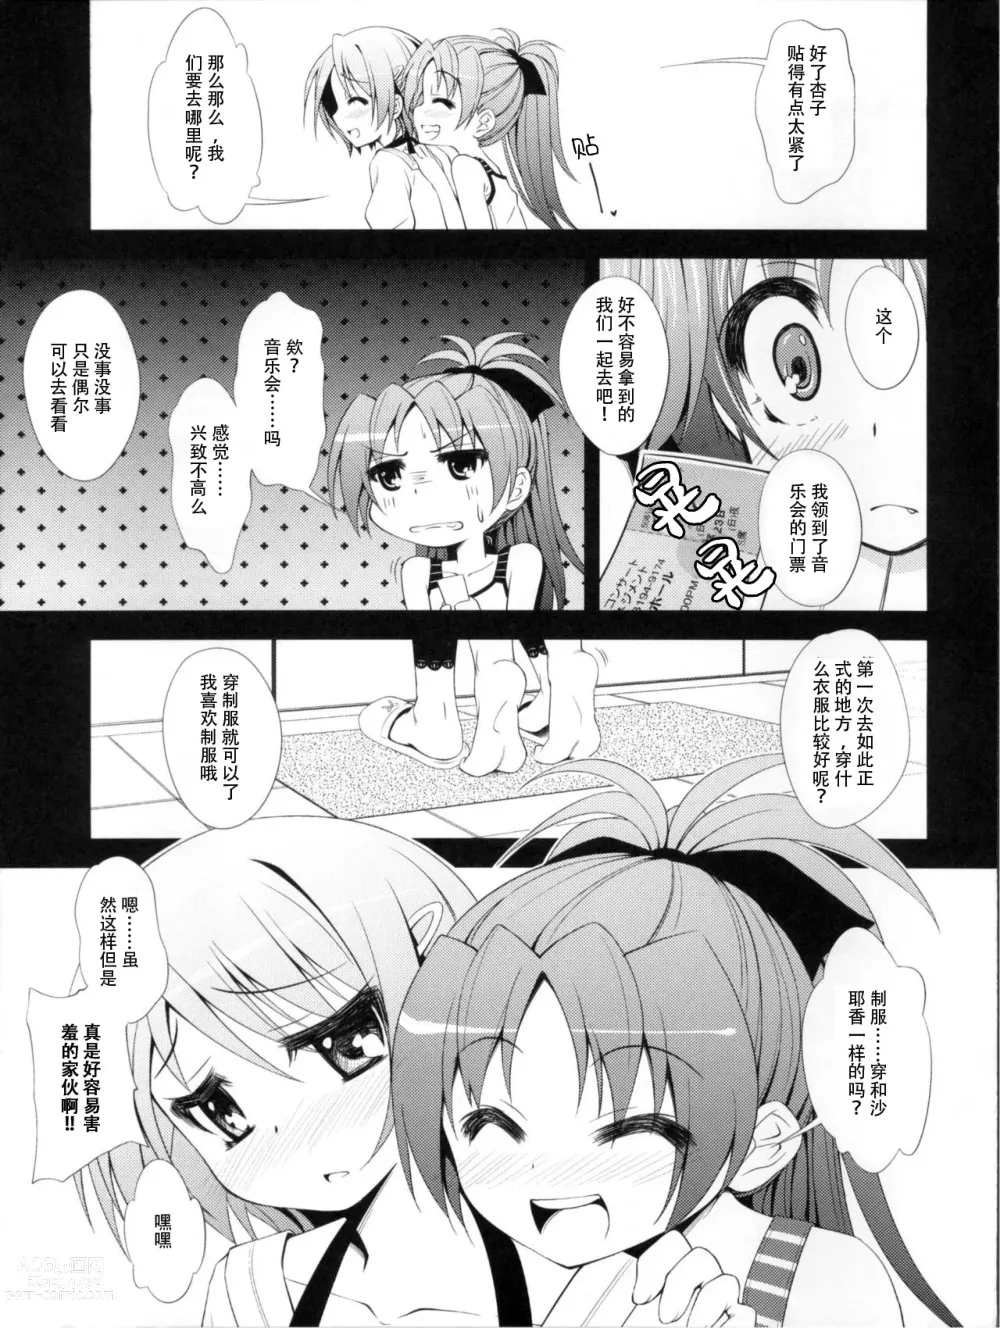 Page 4 of doujinshi Lovely Girls Lily vol. 2